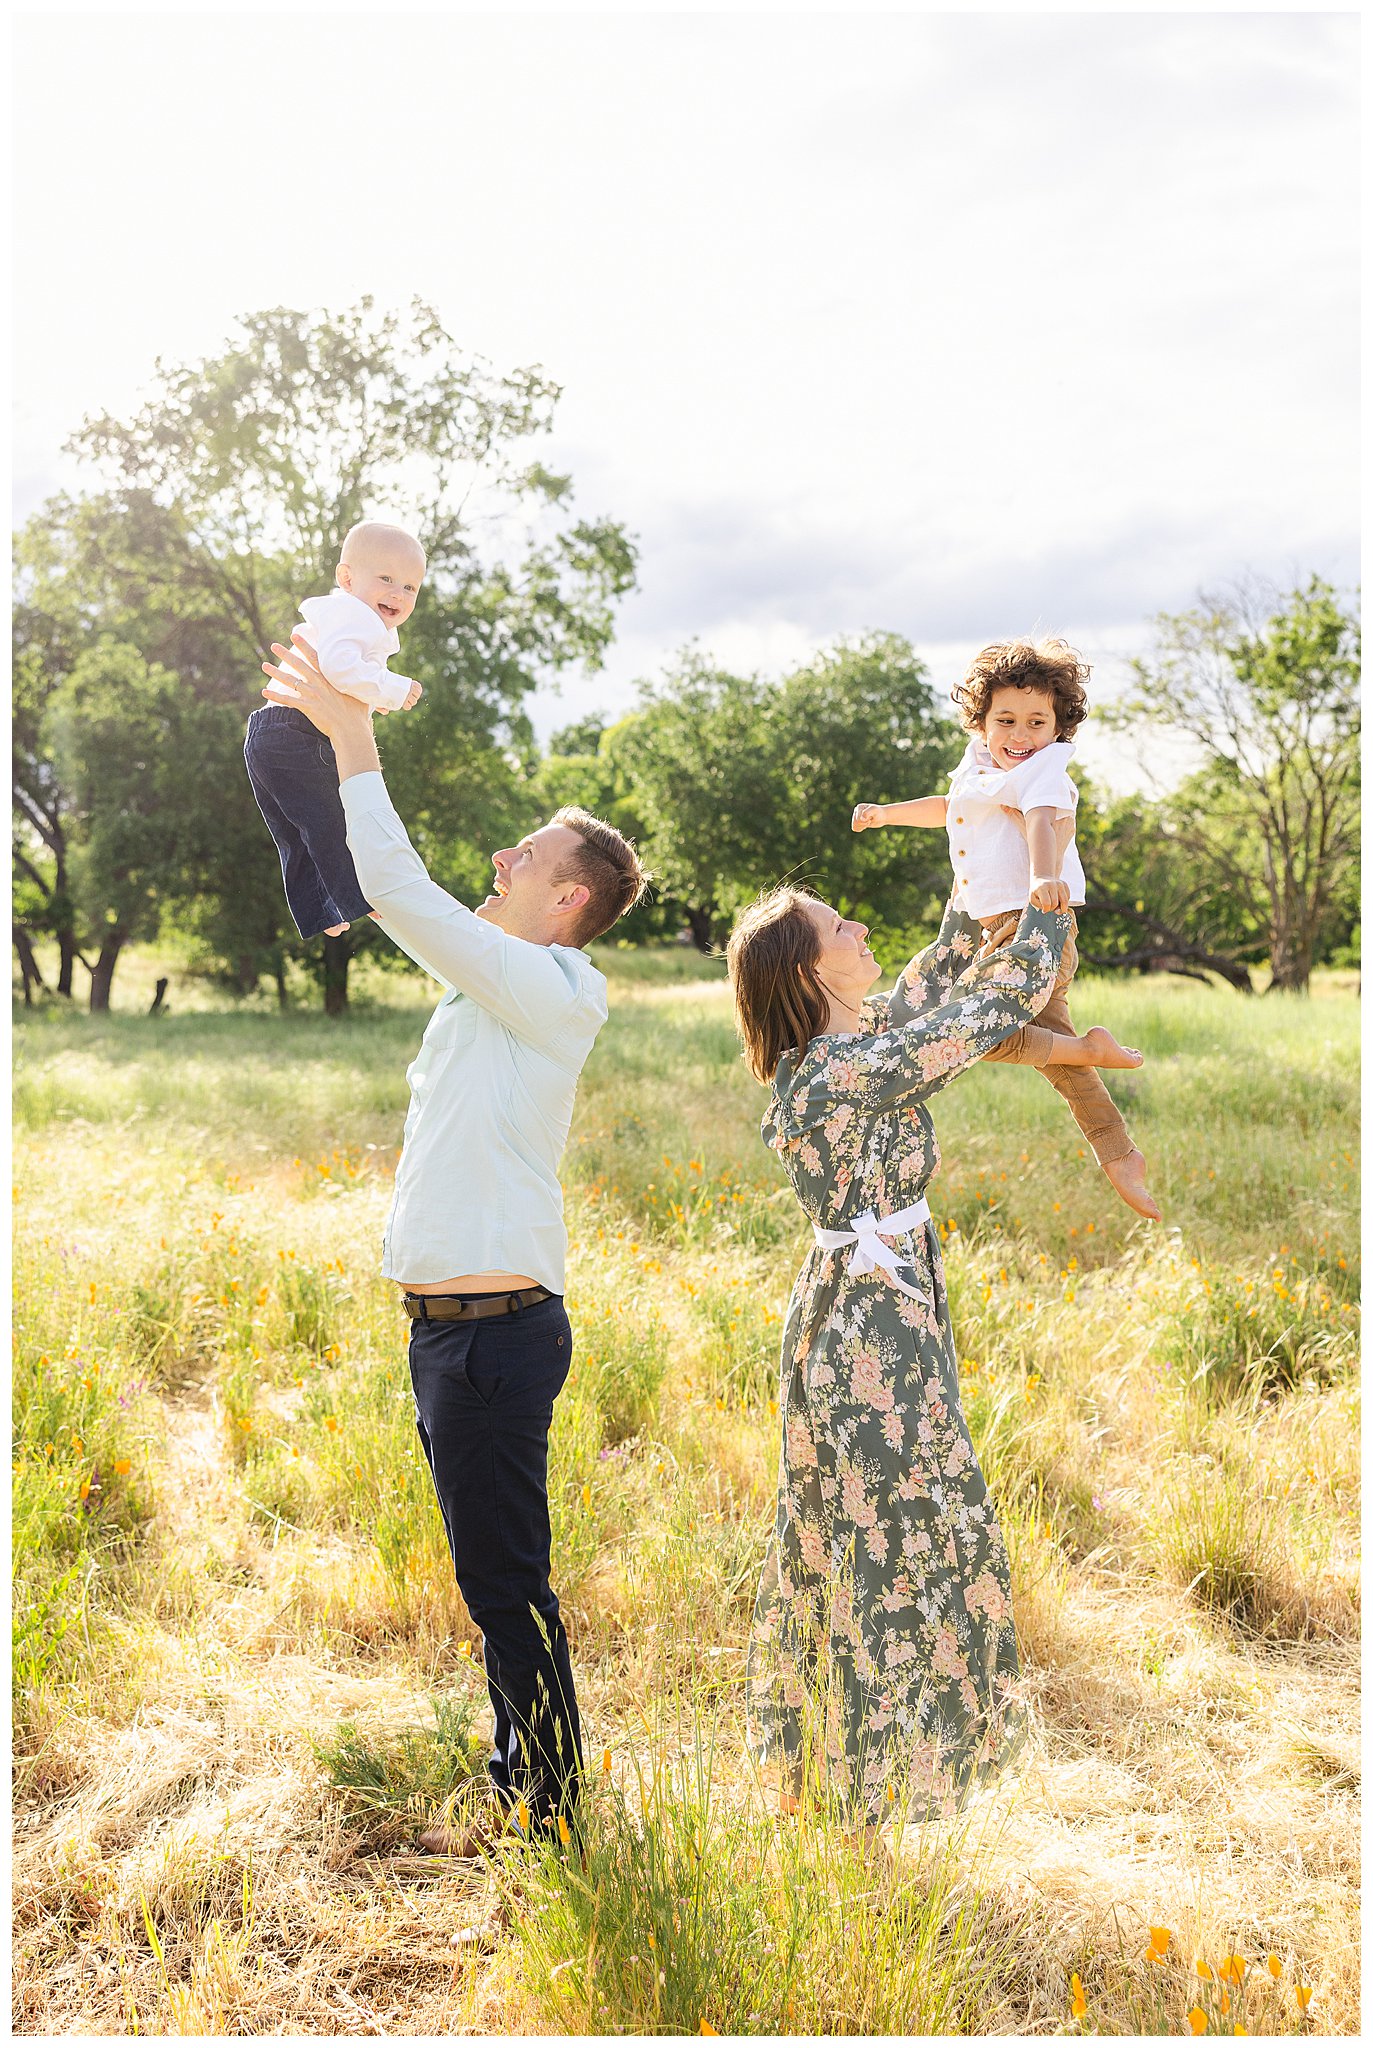 Chico Family Session in Wildflowers and Grass Field | Hannah + Travis